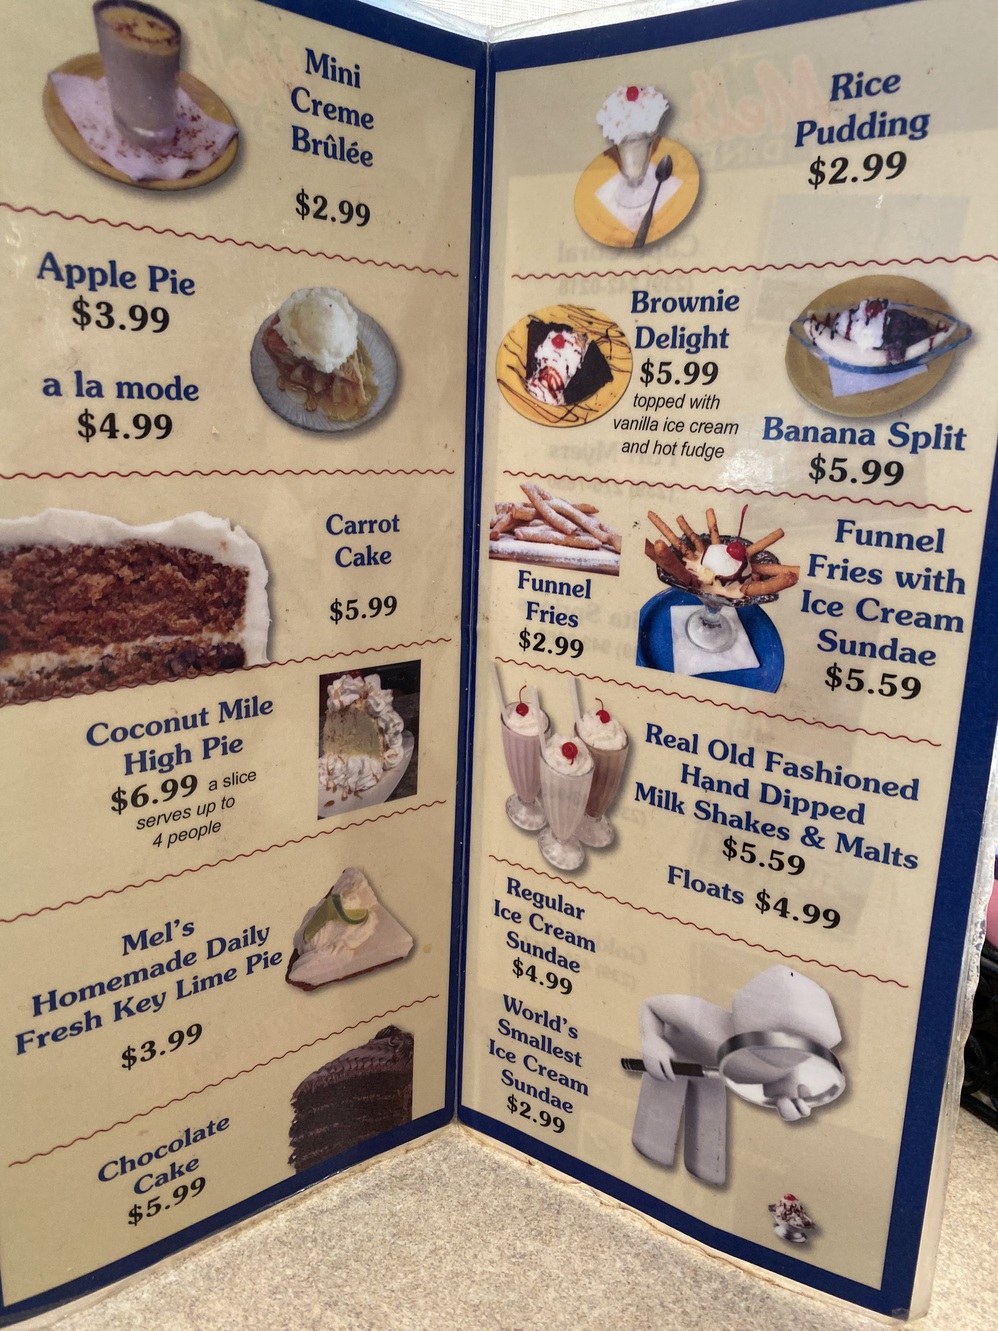 The dessert menu has sweet treats both large and small.